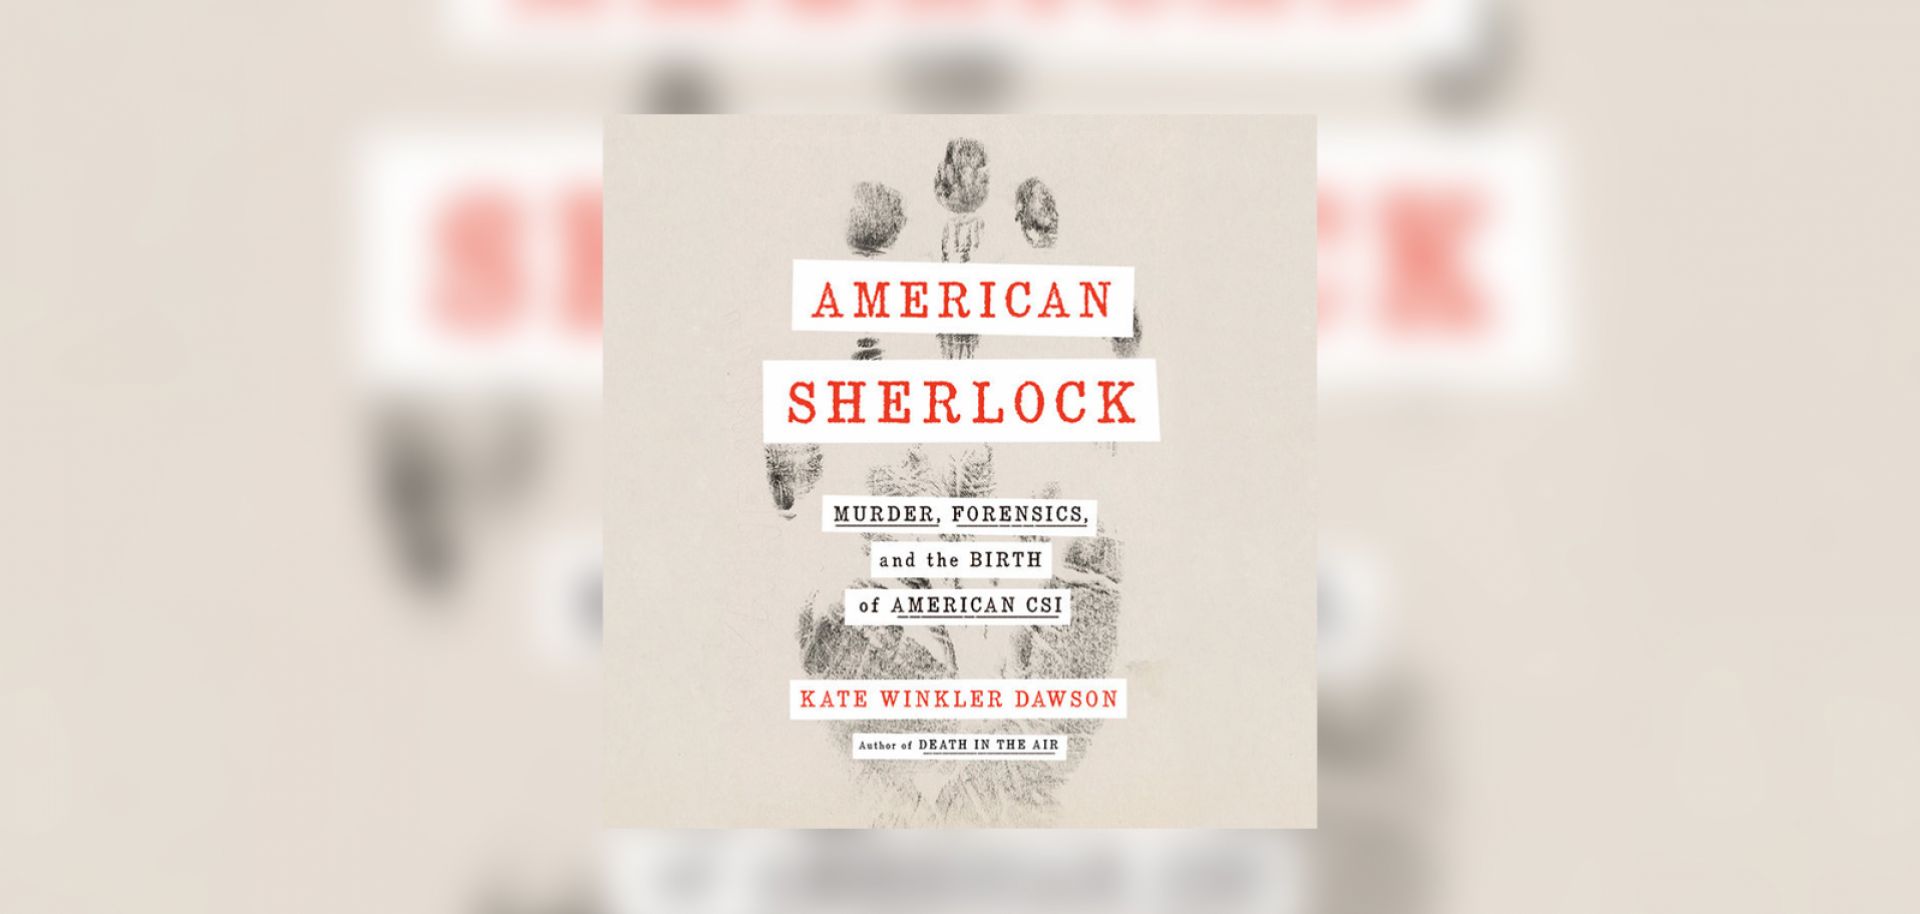 The cover of the book "American Sherlock" by author Kate Winkler Dawson.